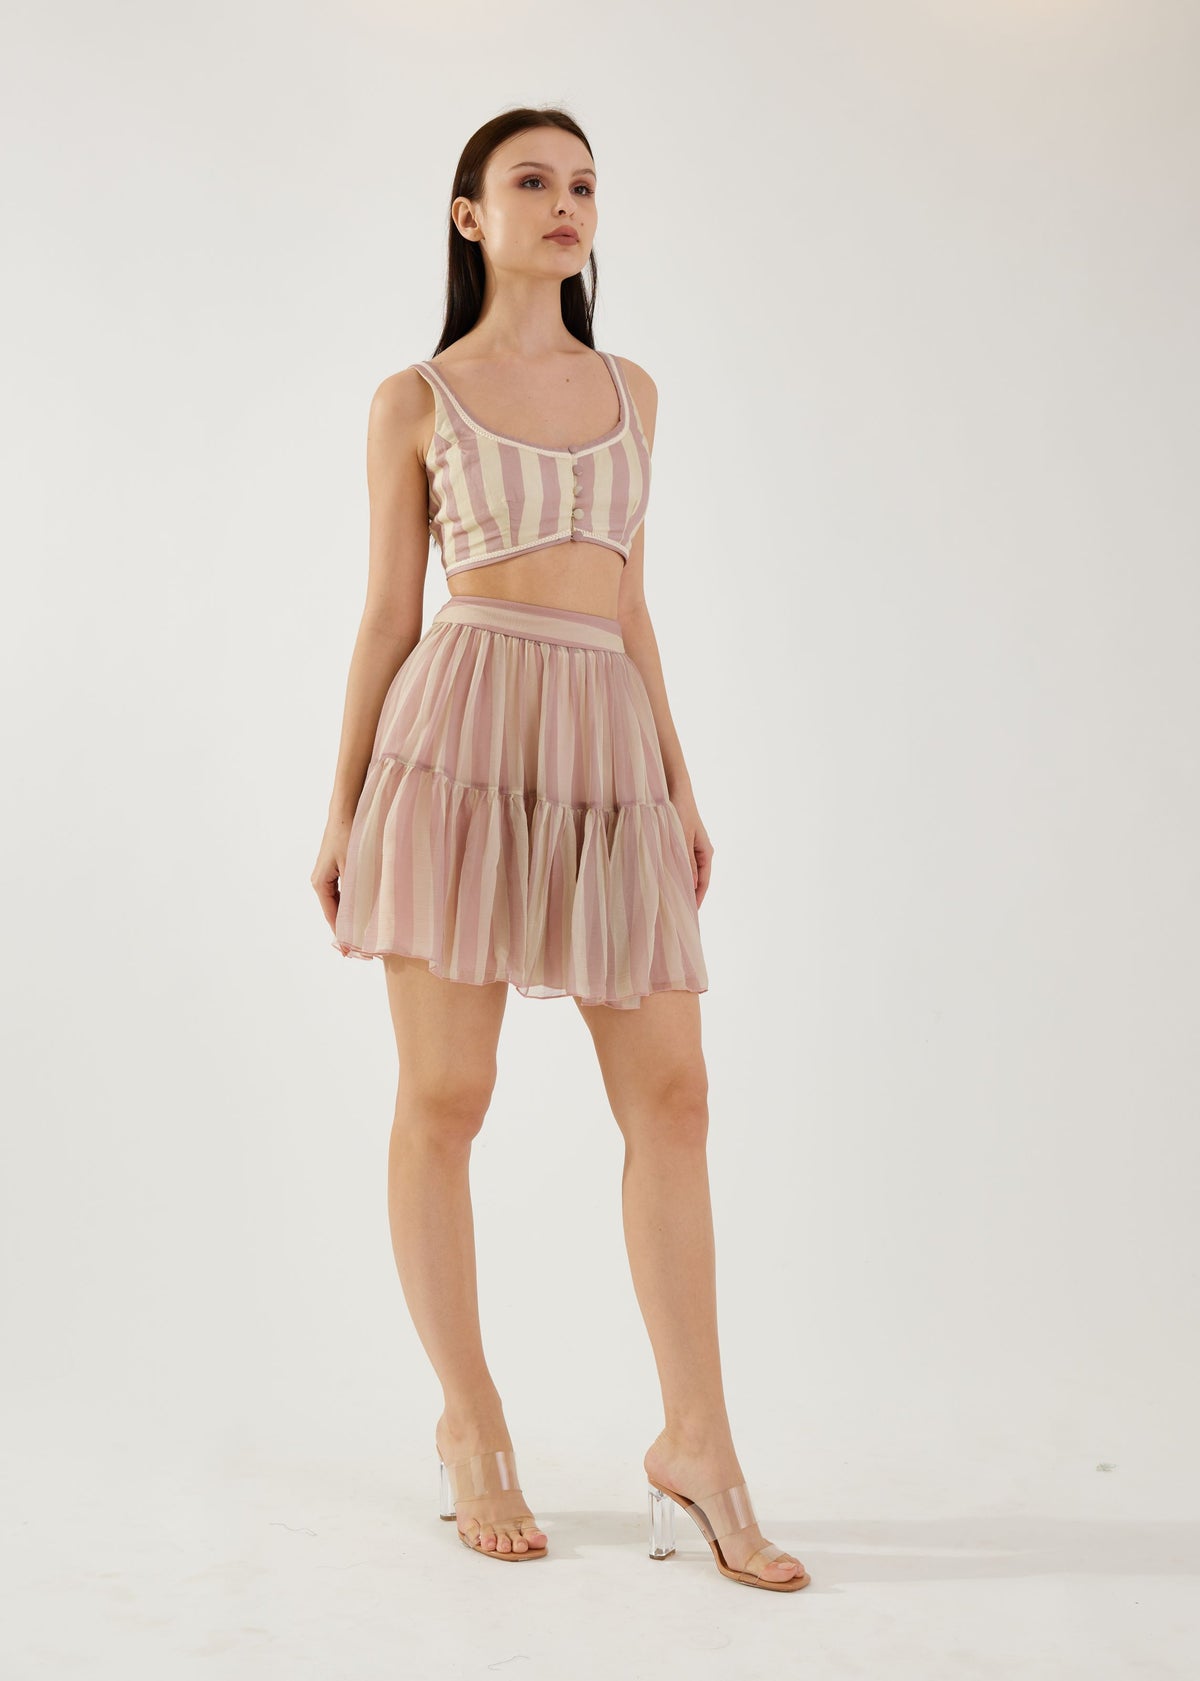 ROSE PINK AND CREAM STRIPE BUSTIER